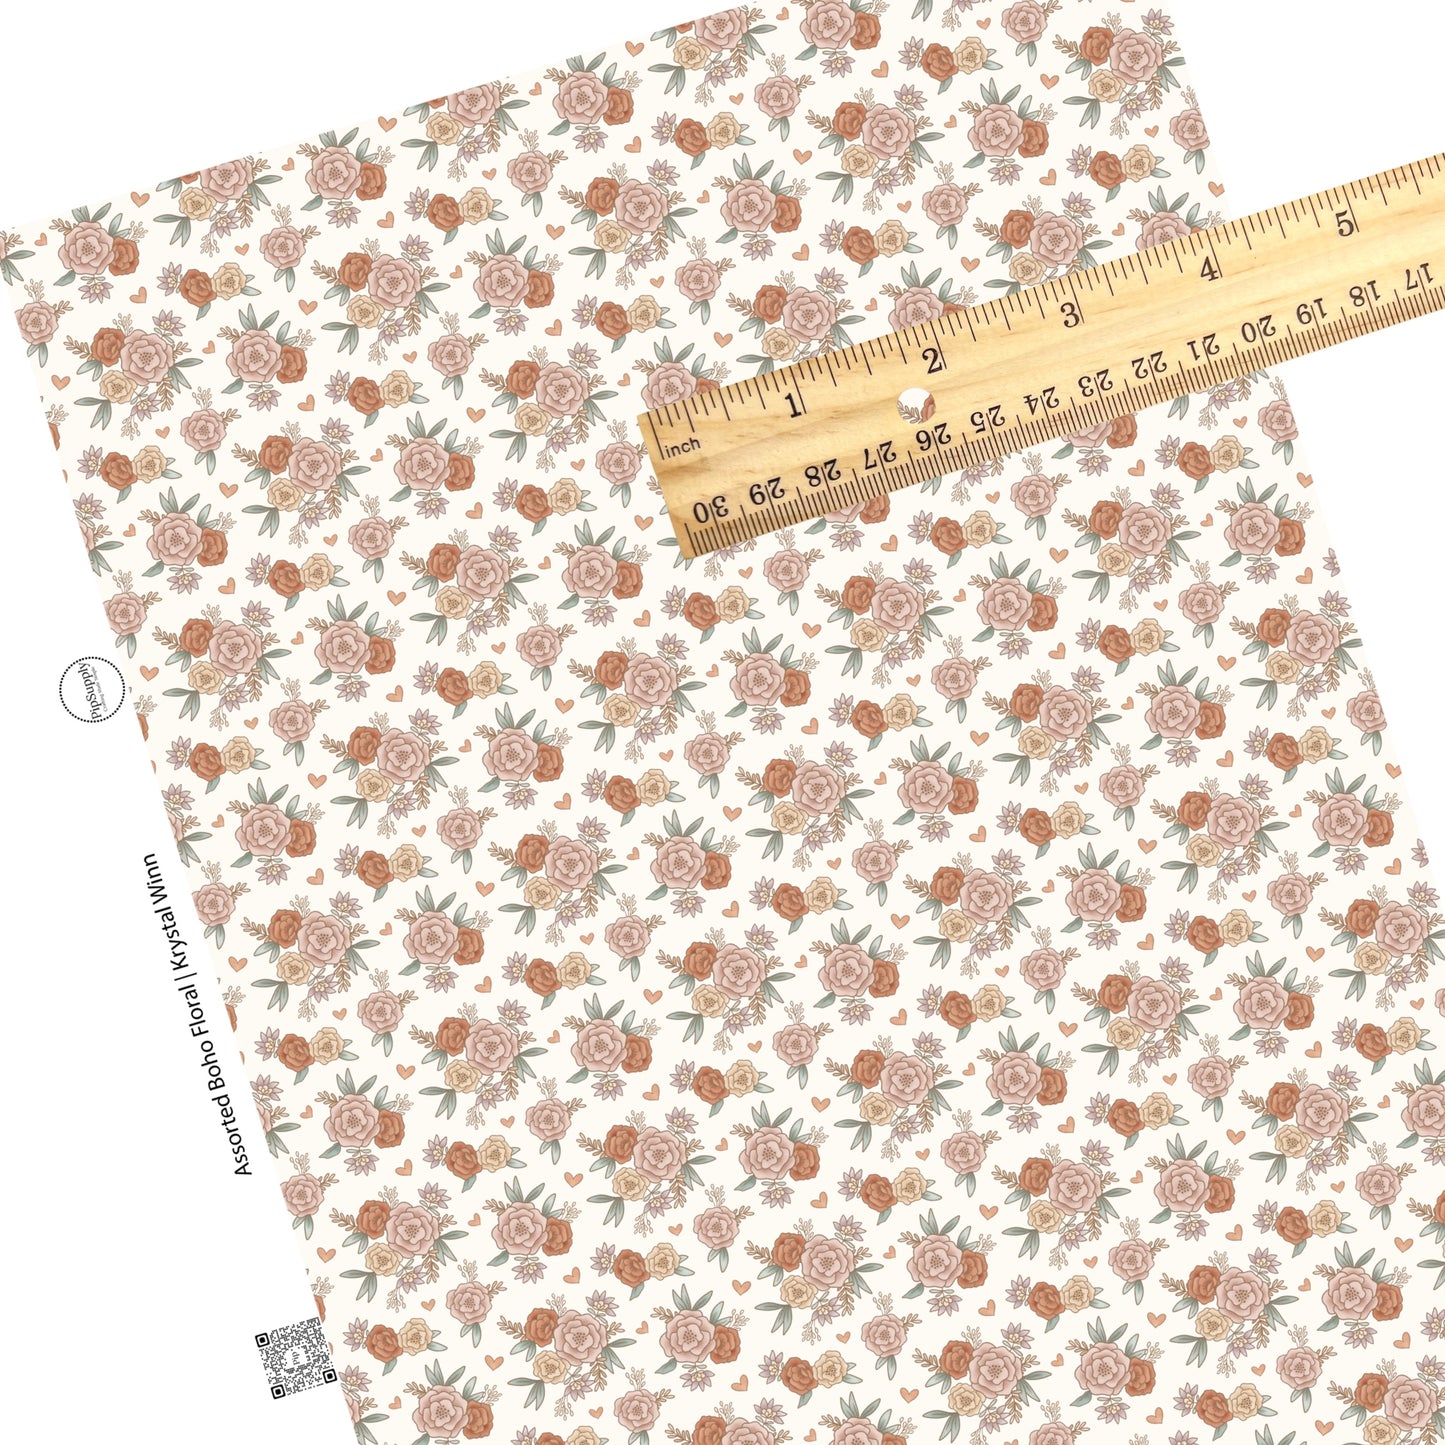 Rust and peach flowers and hearts on cream faux leather sheets